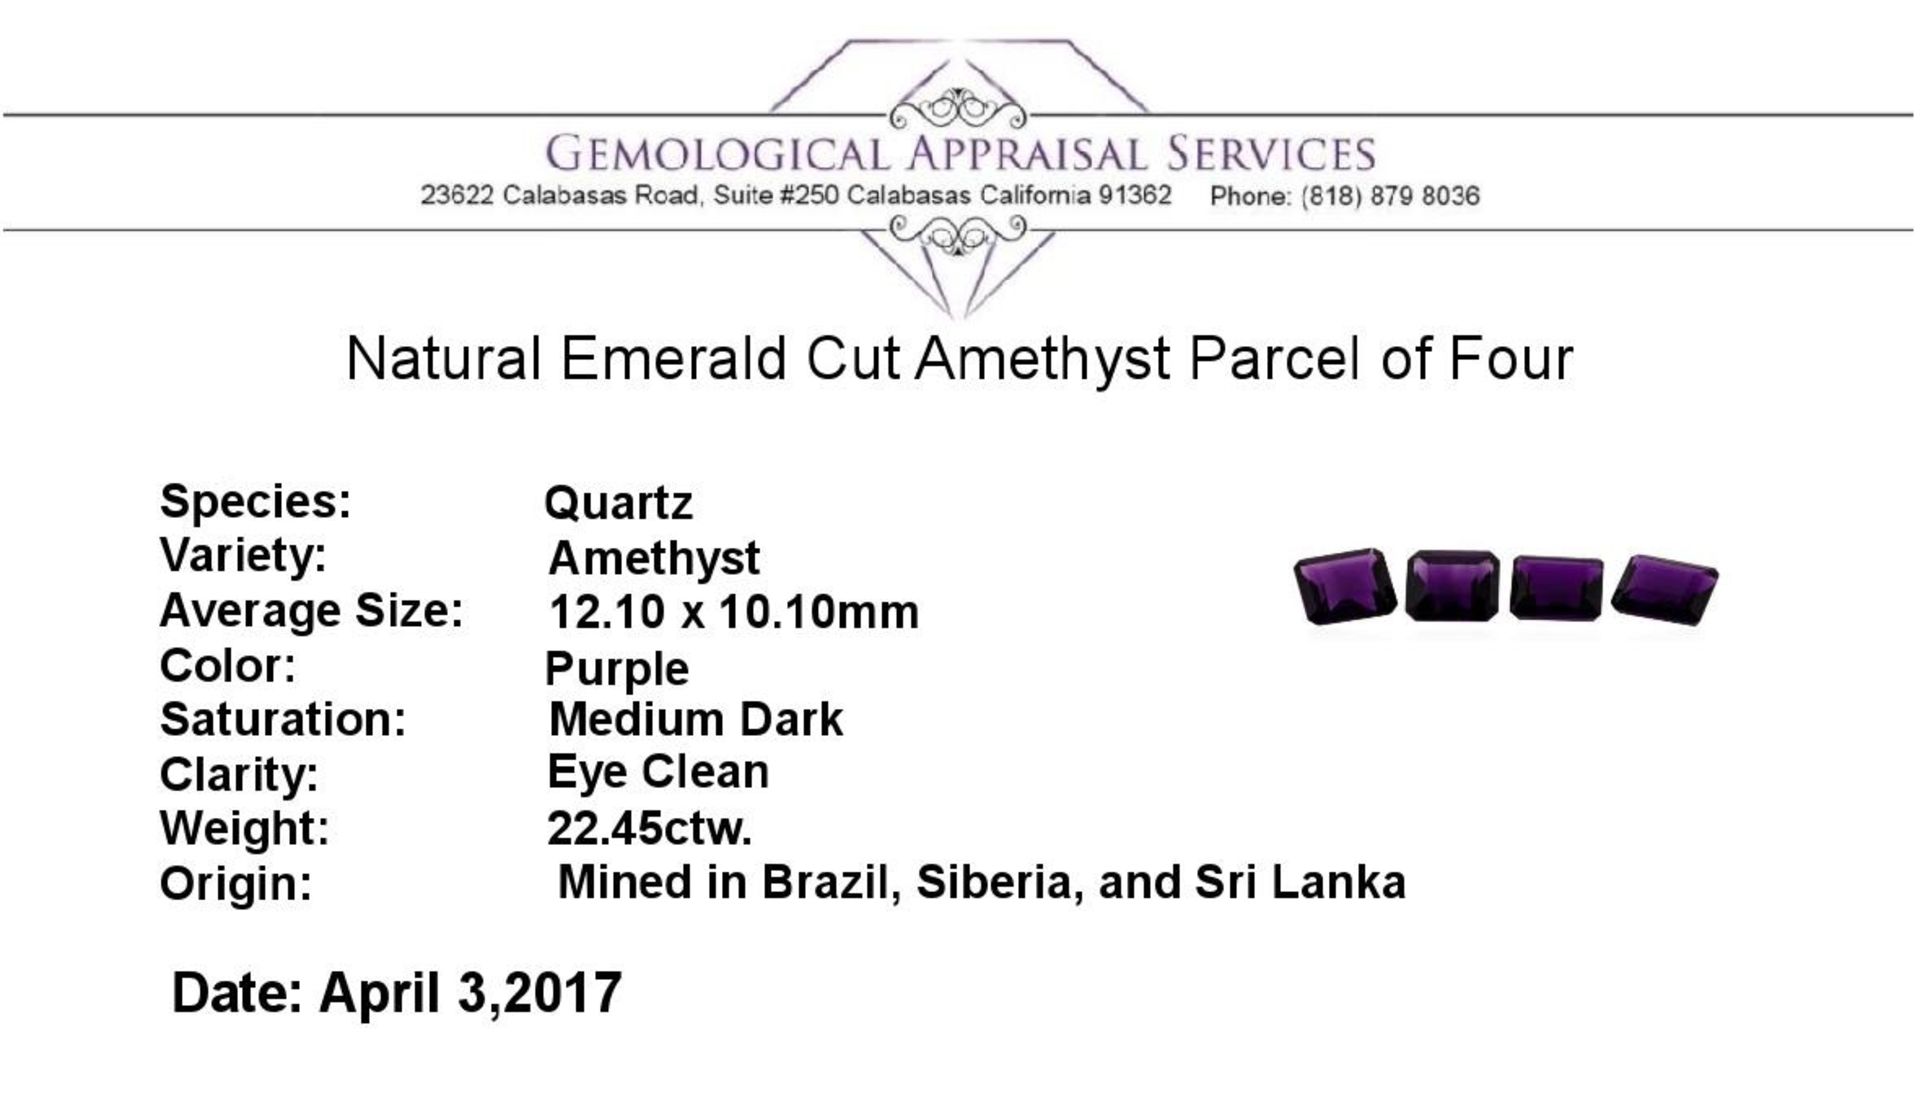 22.45 ctw. Natural Emerald Cut Amethyst Parcel of Four - Image 3 of 3